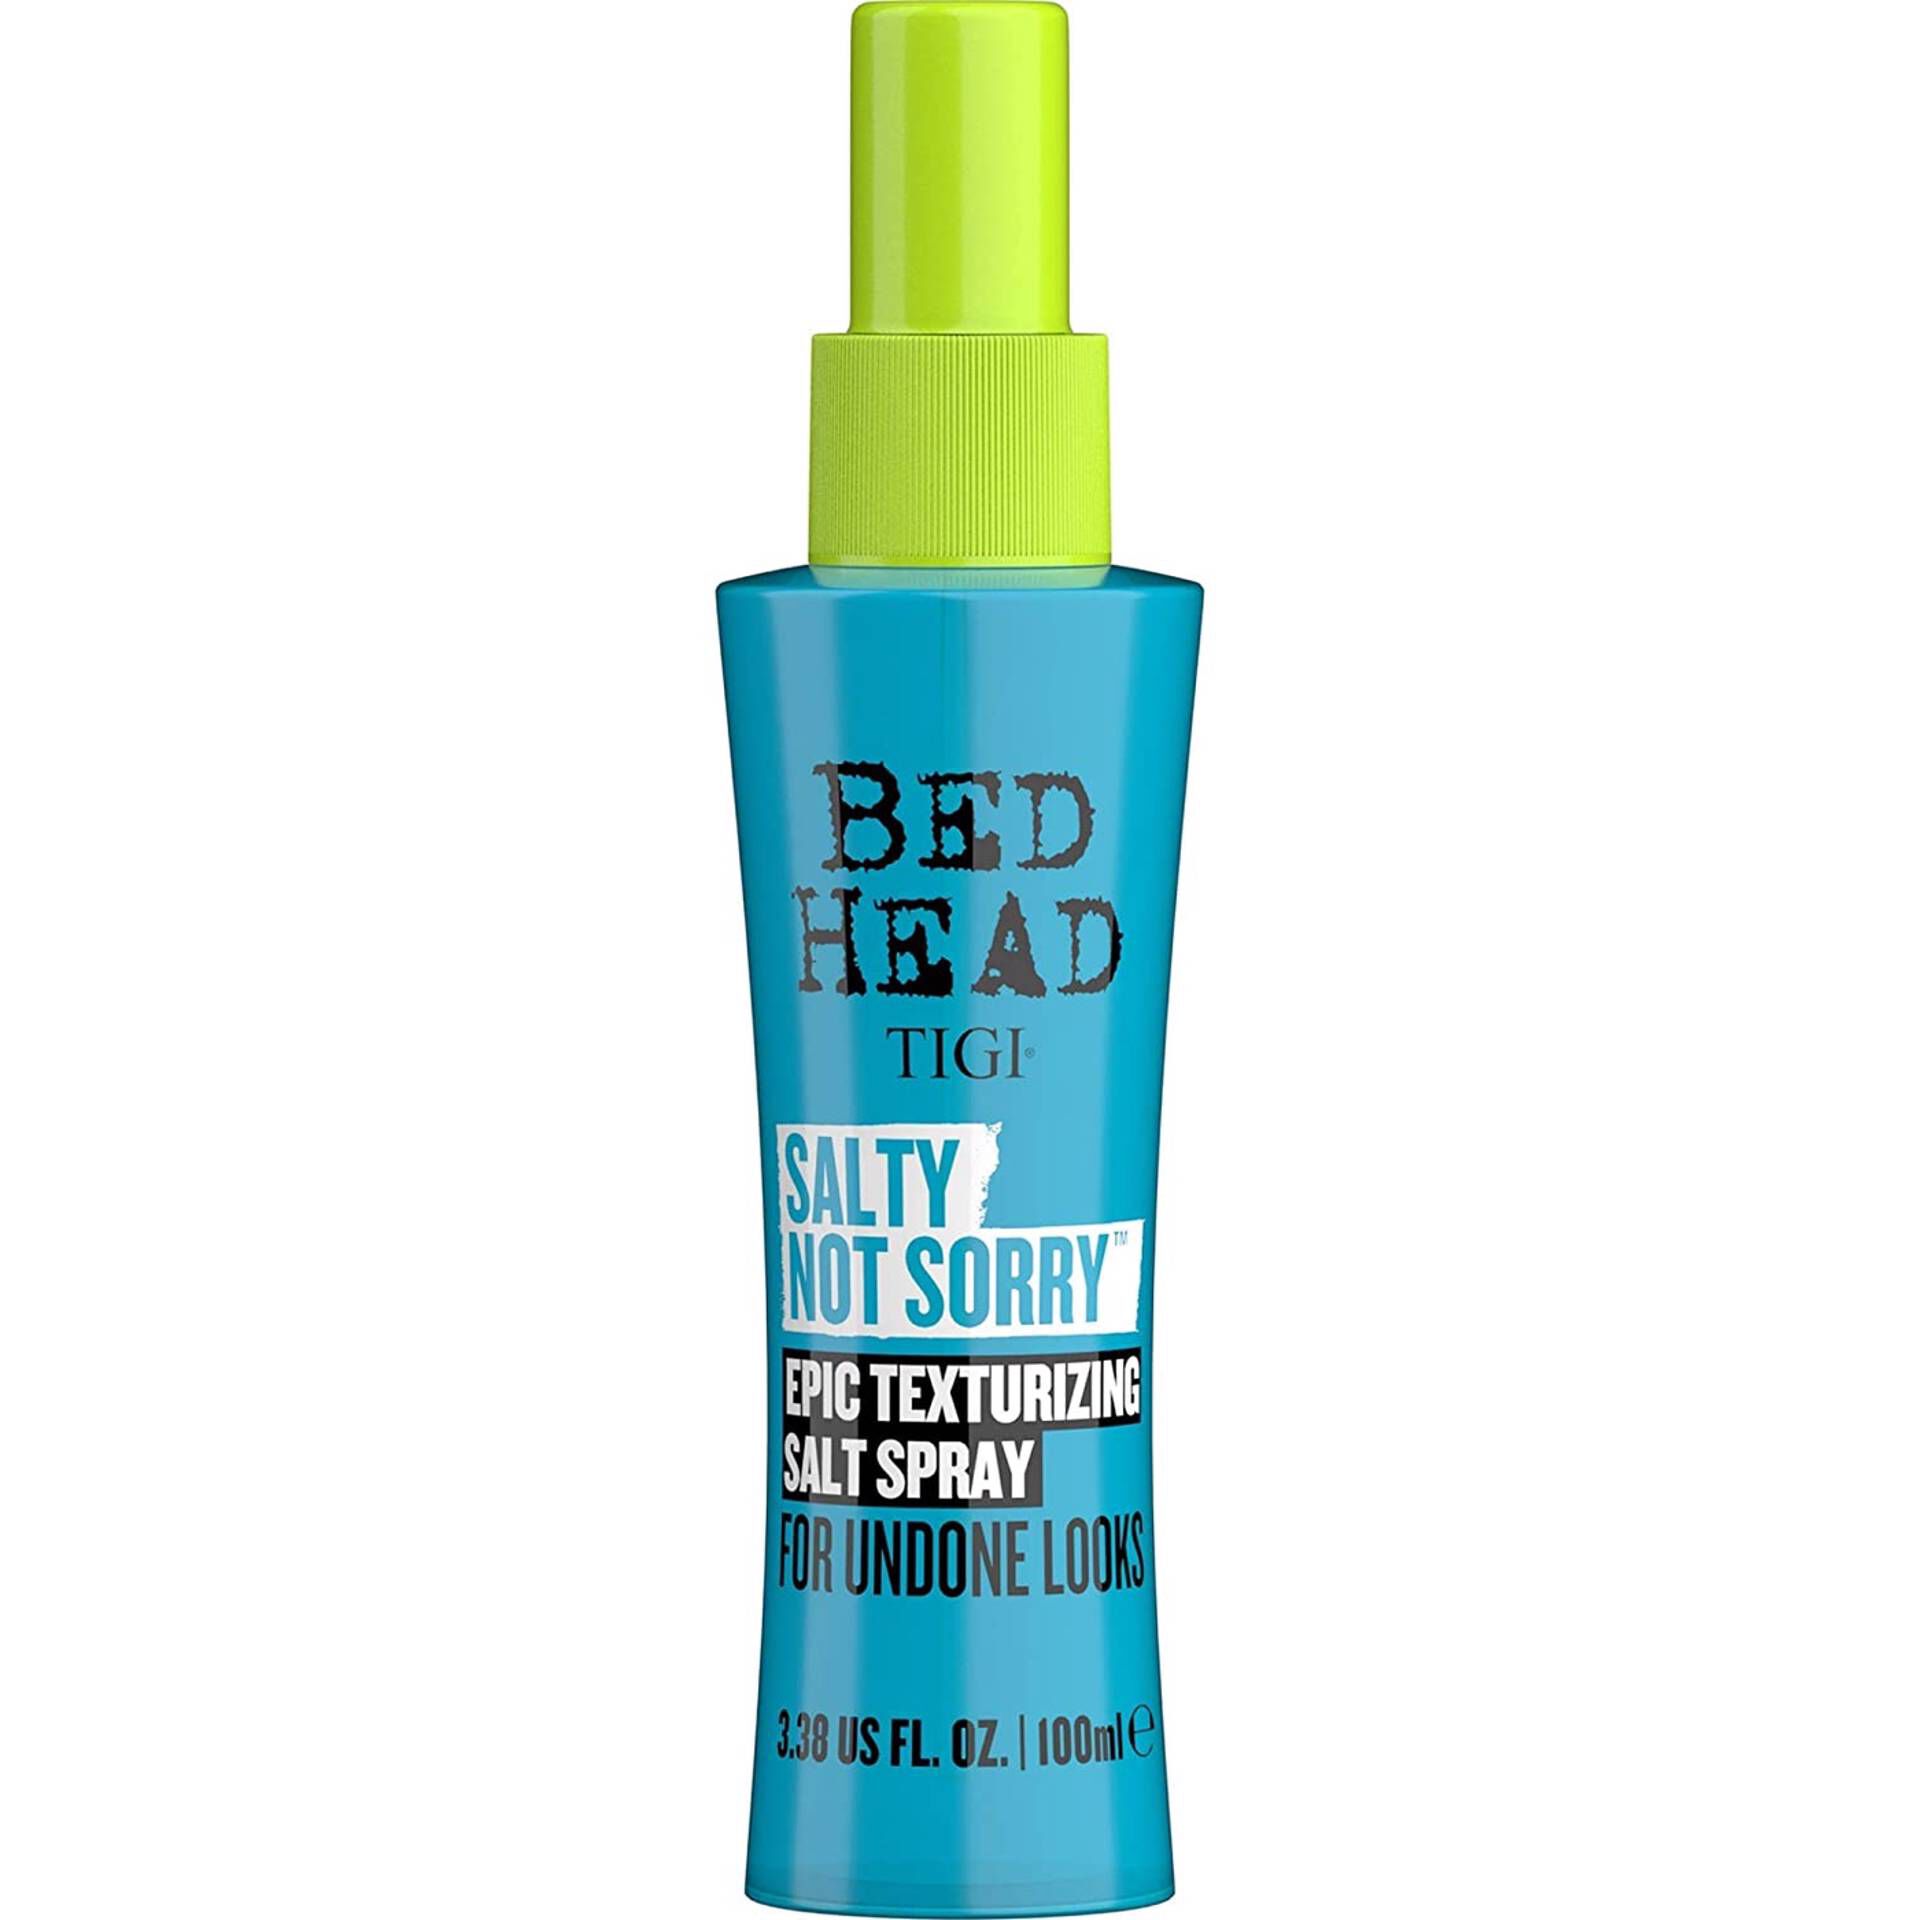 BED HEAD salty not sorry 100 ml